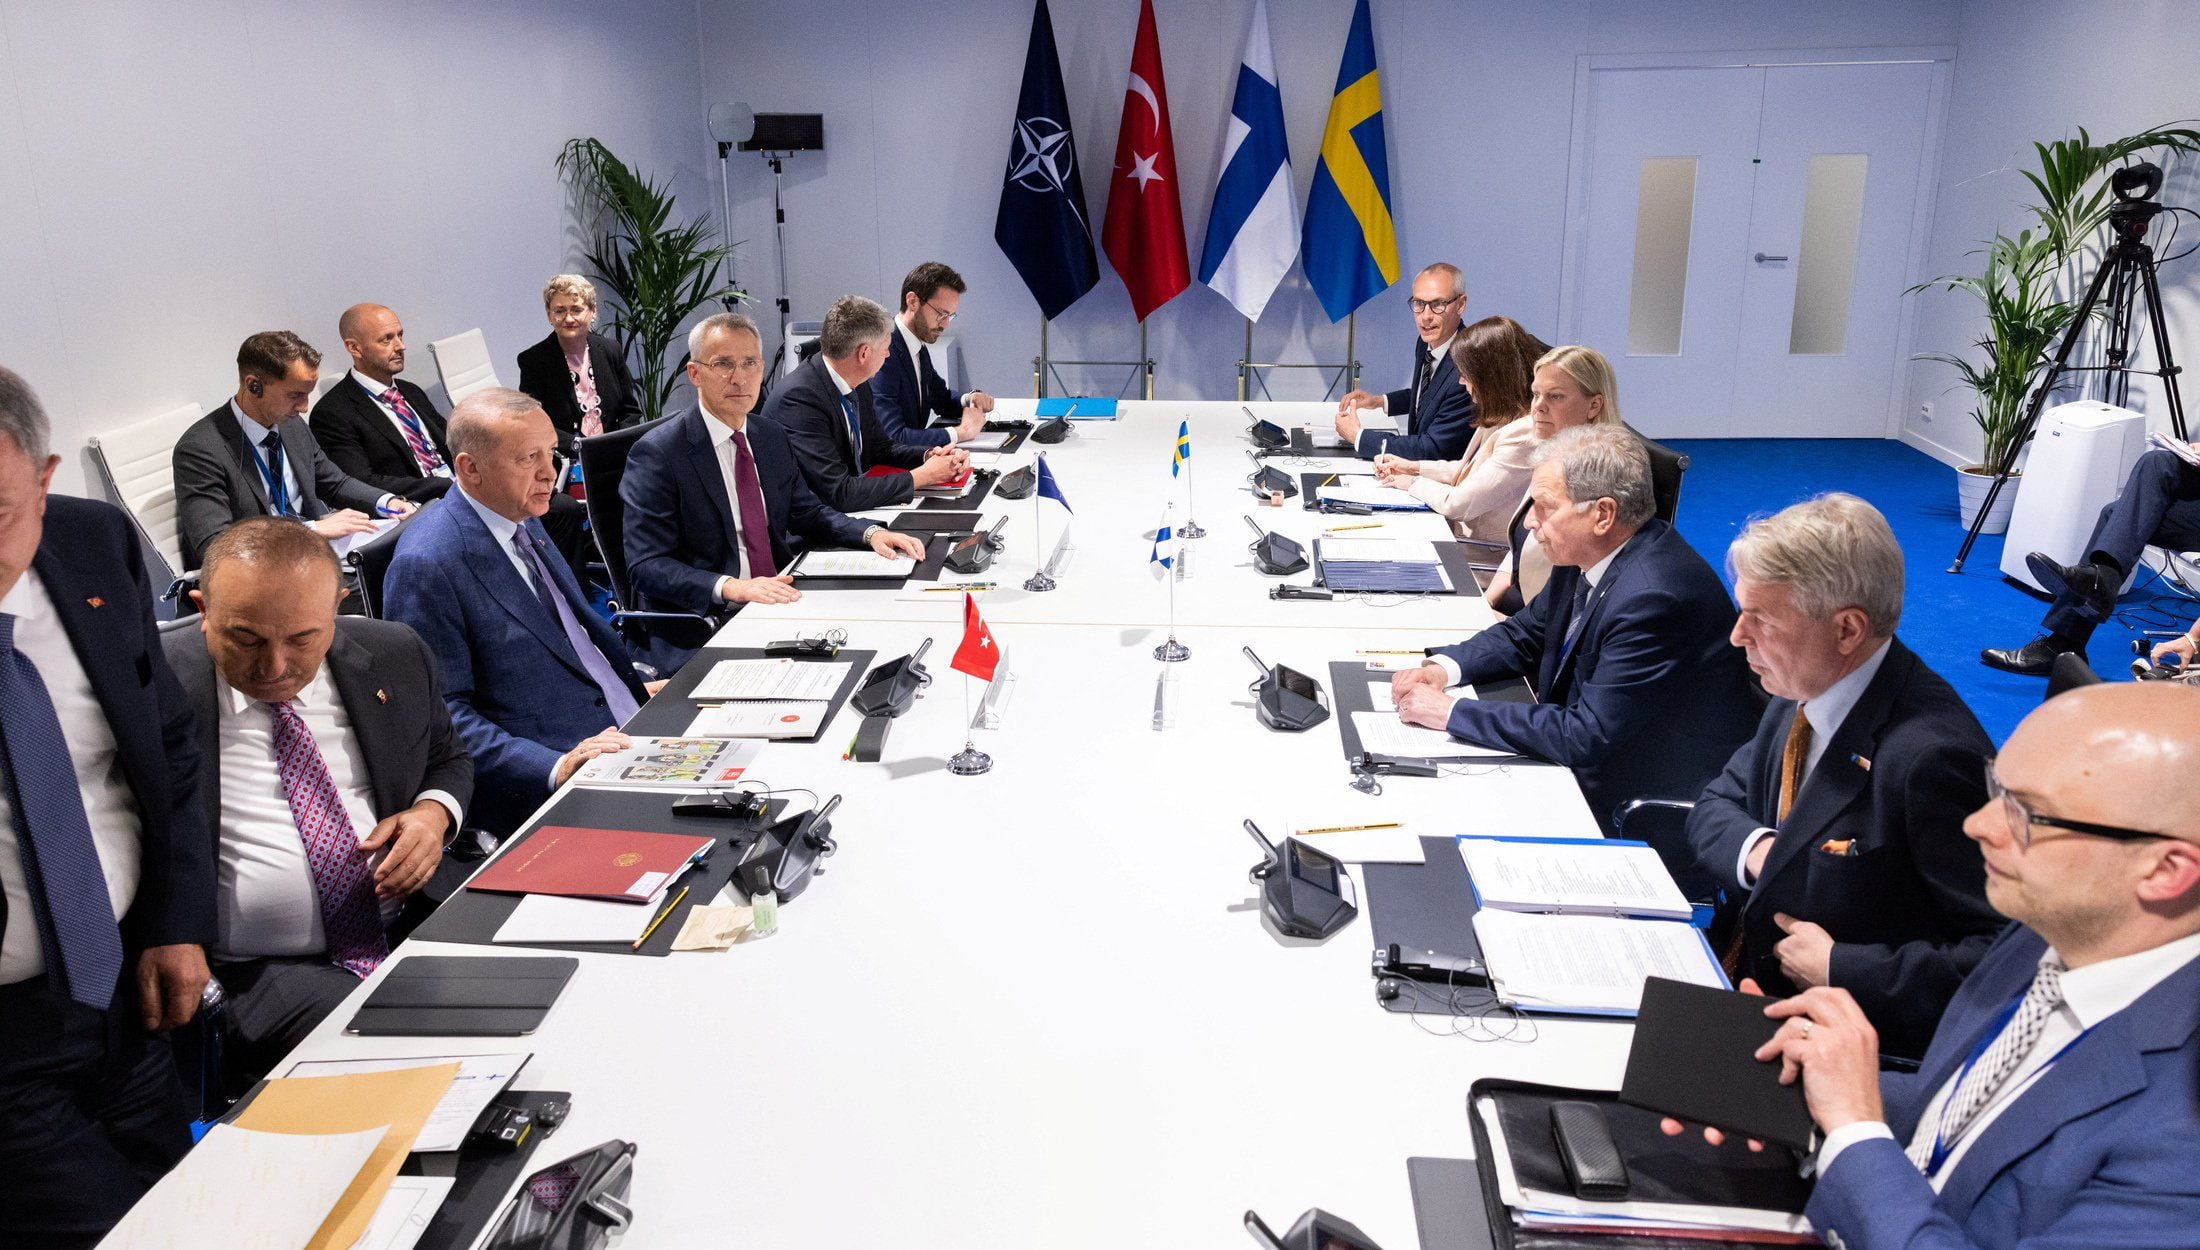 Working table, today at the Madrid 2022 NATO Summit. The Secretary General, Jens Stoltenberg;  the president of Turkey, Tayyip Erdogan;  the Prime Minister of Sweden, Magdalena Andersson;  and the president of Finland, Sauli Niinisto.  REUTERS